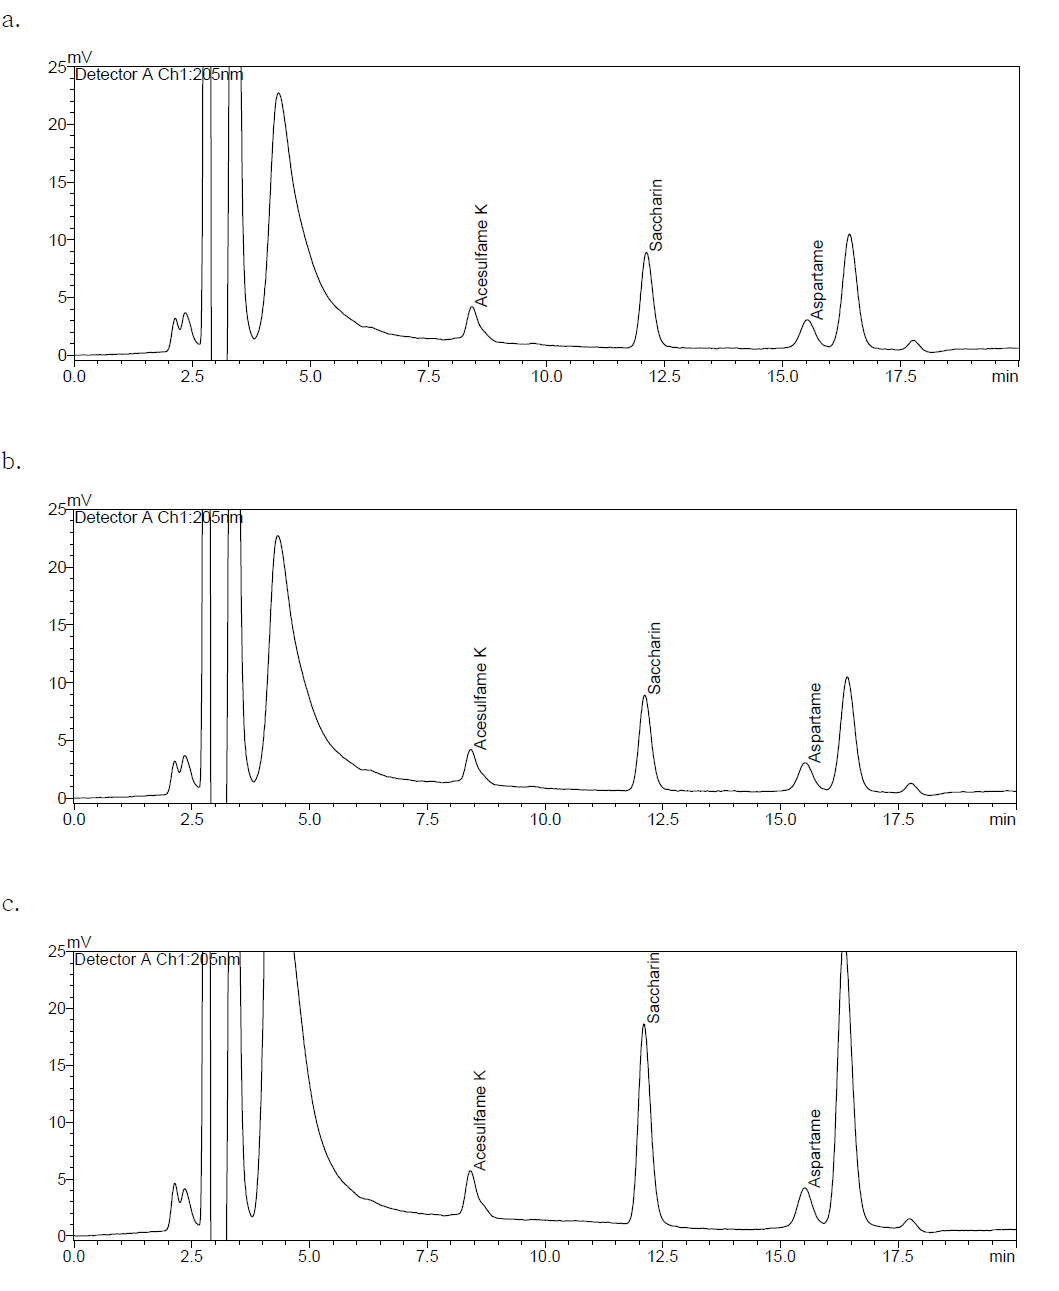 HPLC chromatograms of residual sweetener in solid phase extraction tube